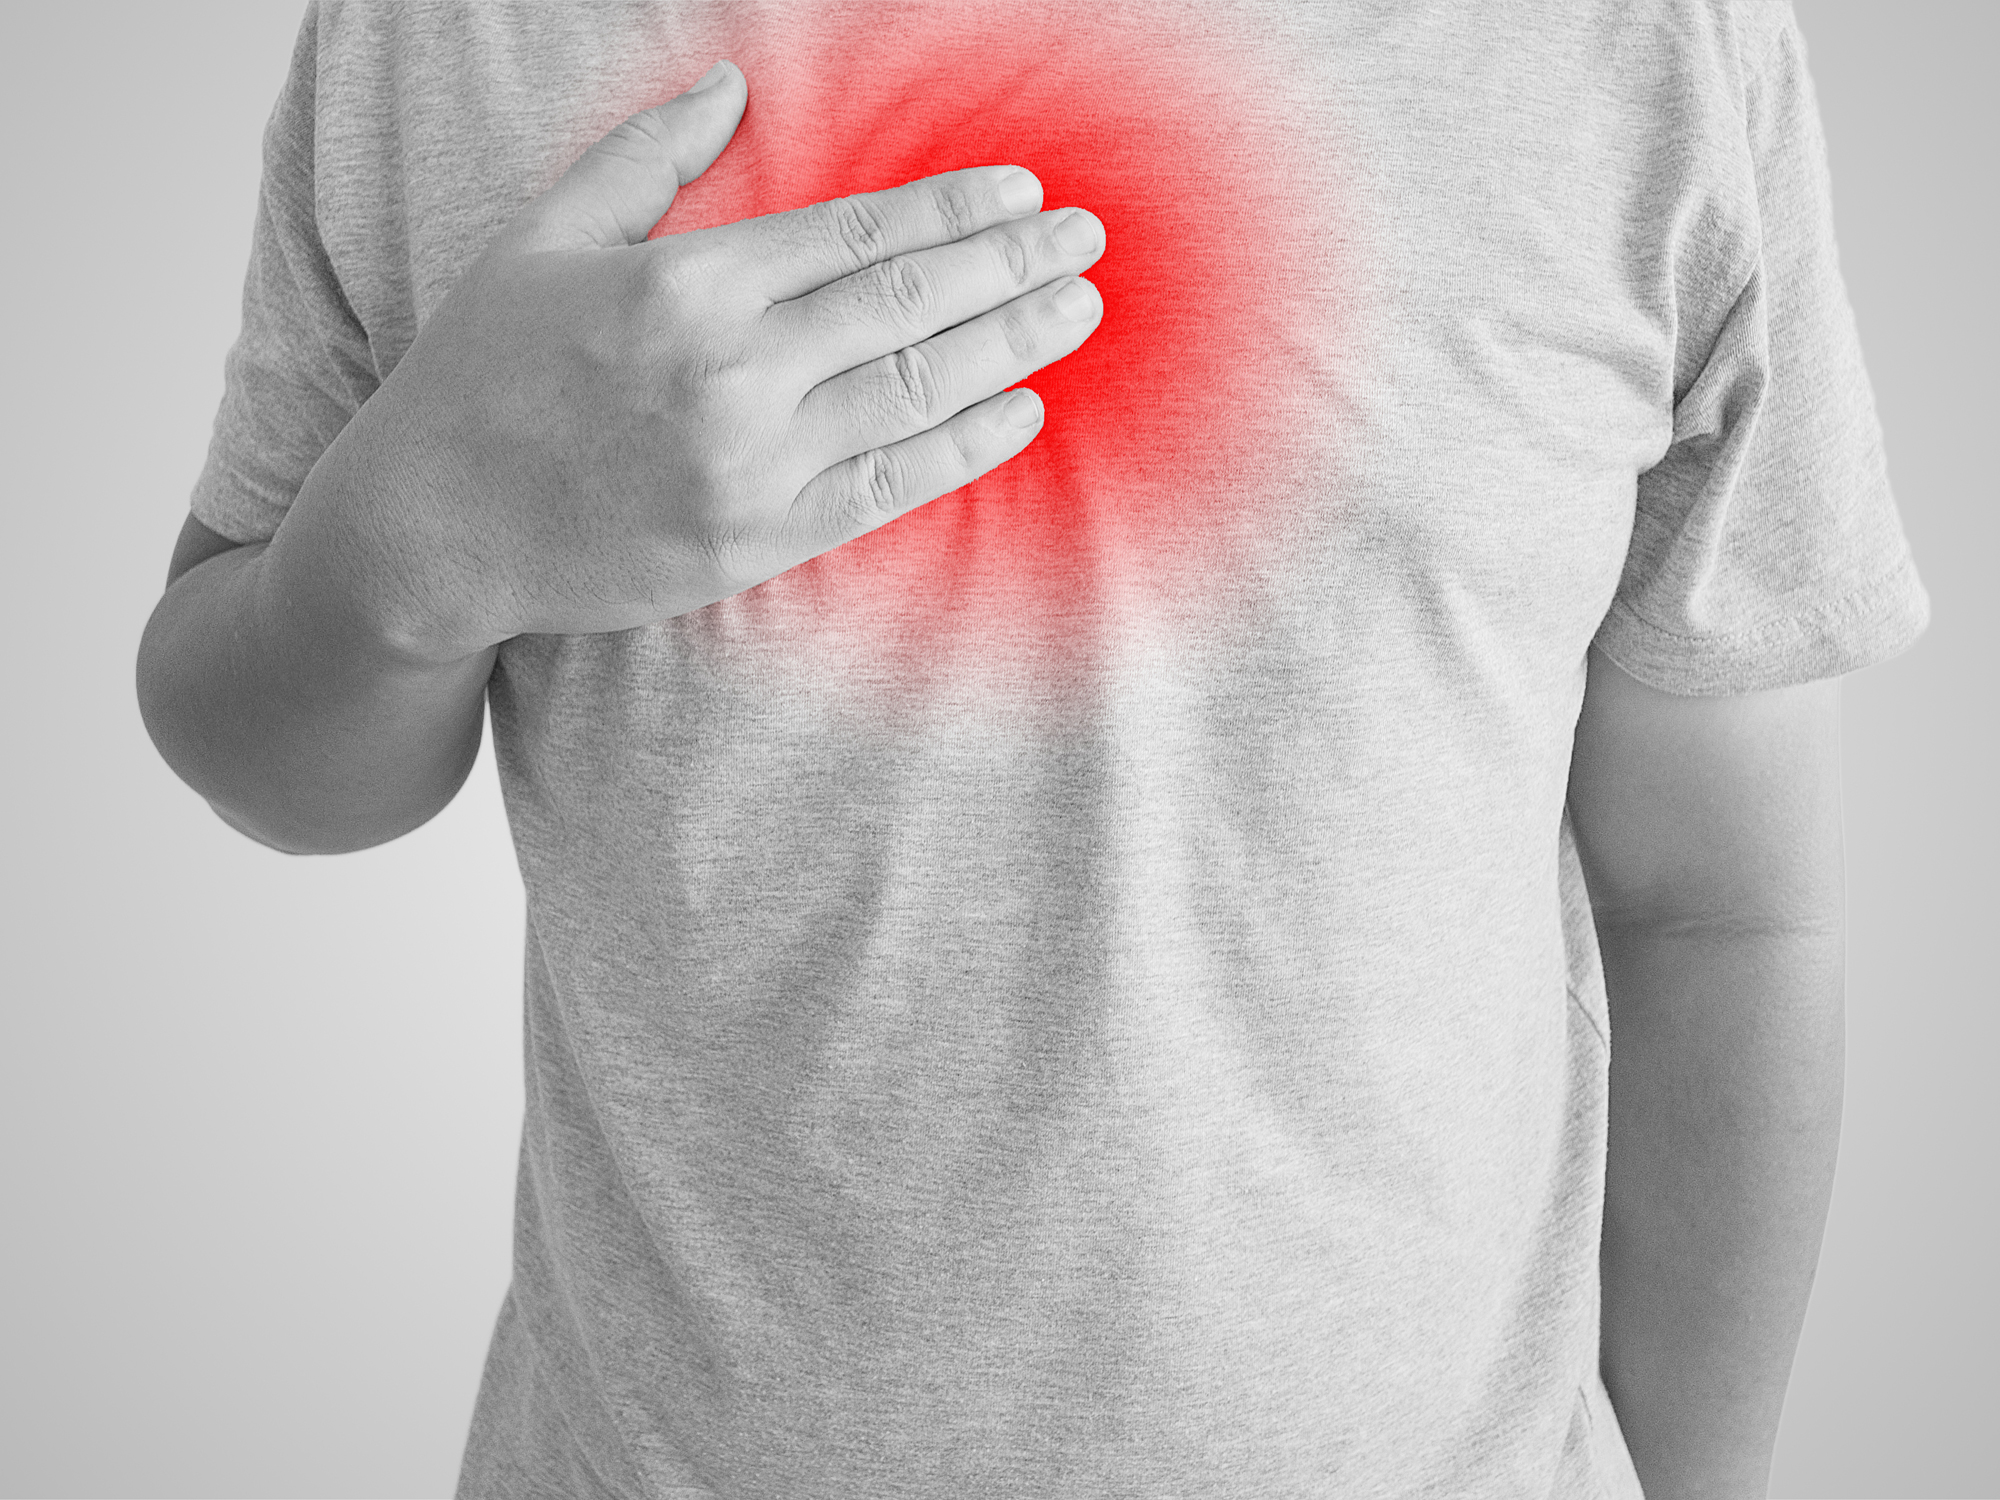 Heartburn relief that doesn’t harm your kidneys